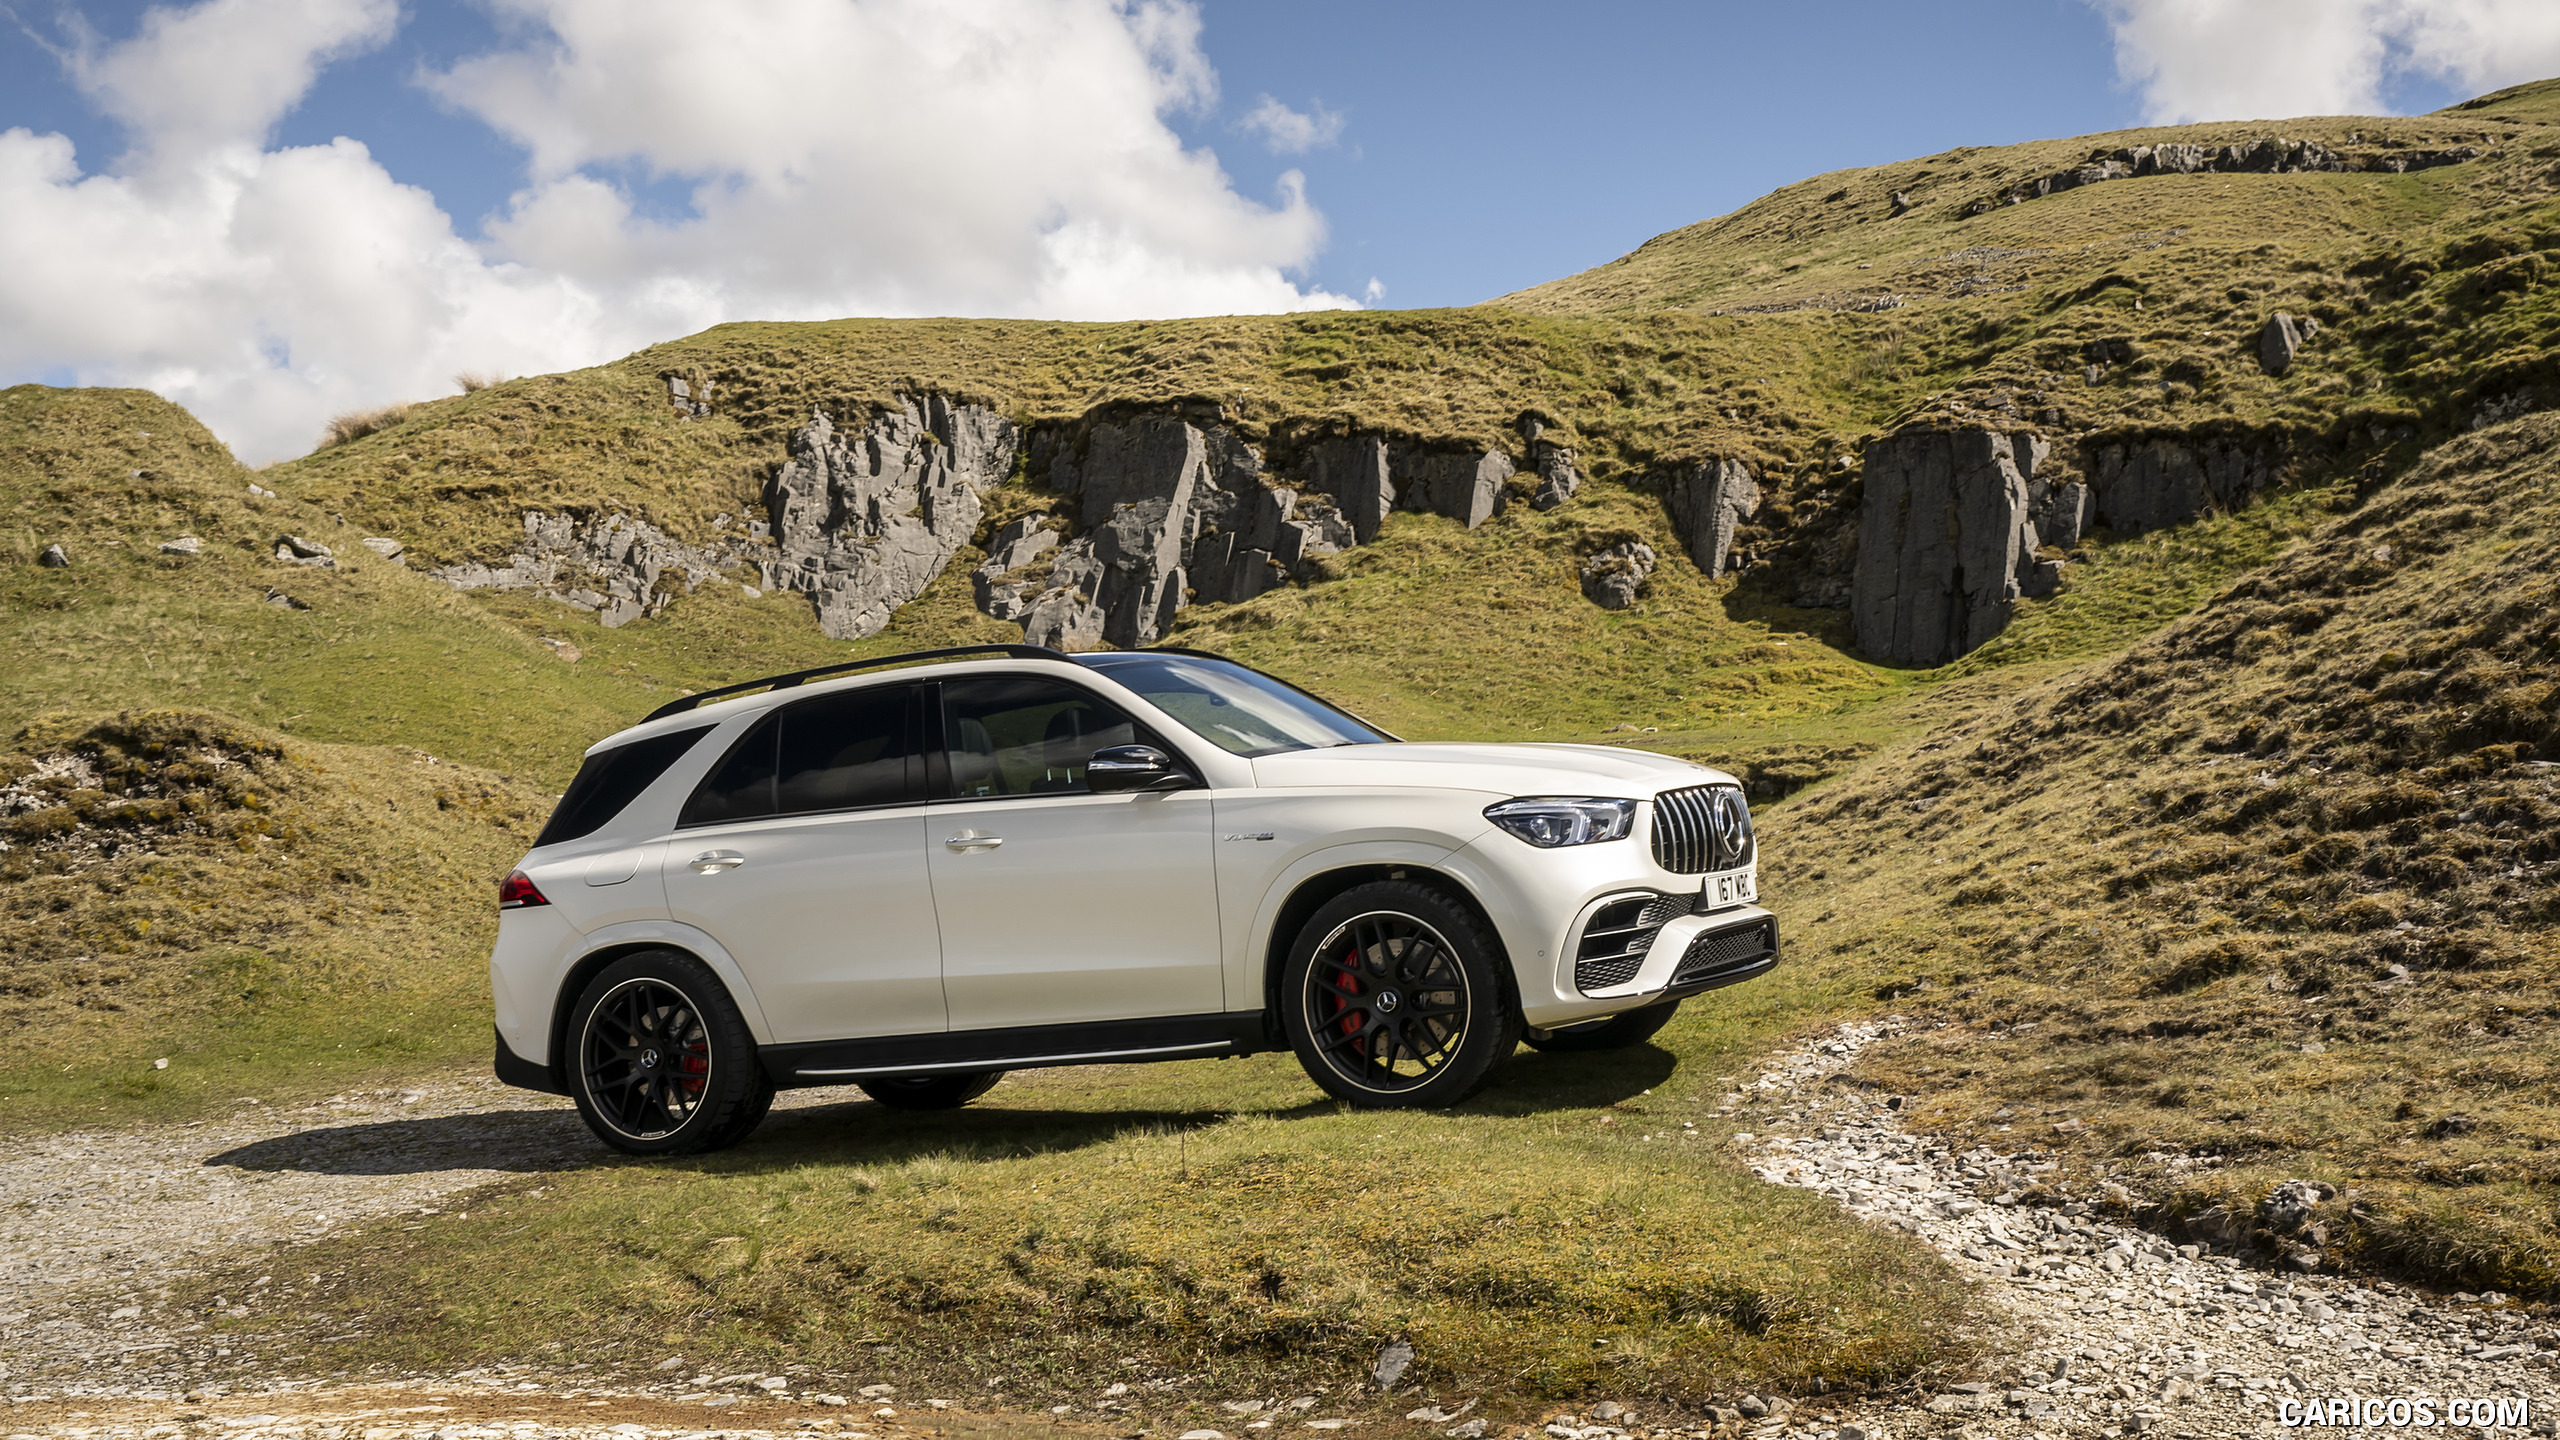 2021 Mercedes-AMG GLE 63 S 4MATIC (UK-Spec) - Side, #140 of 187